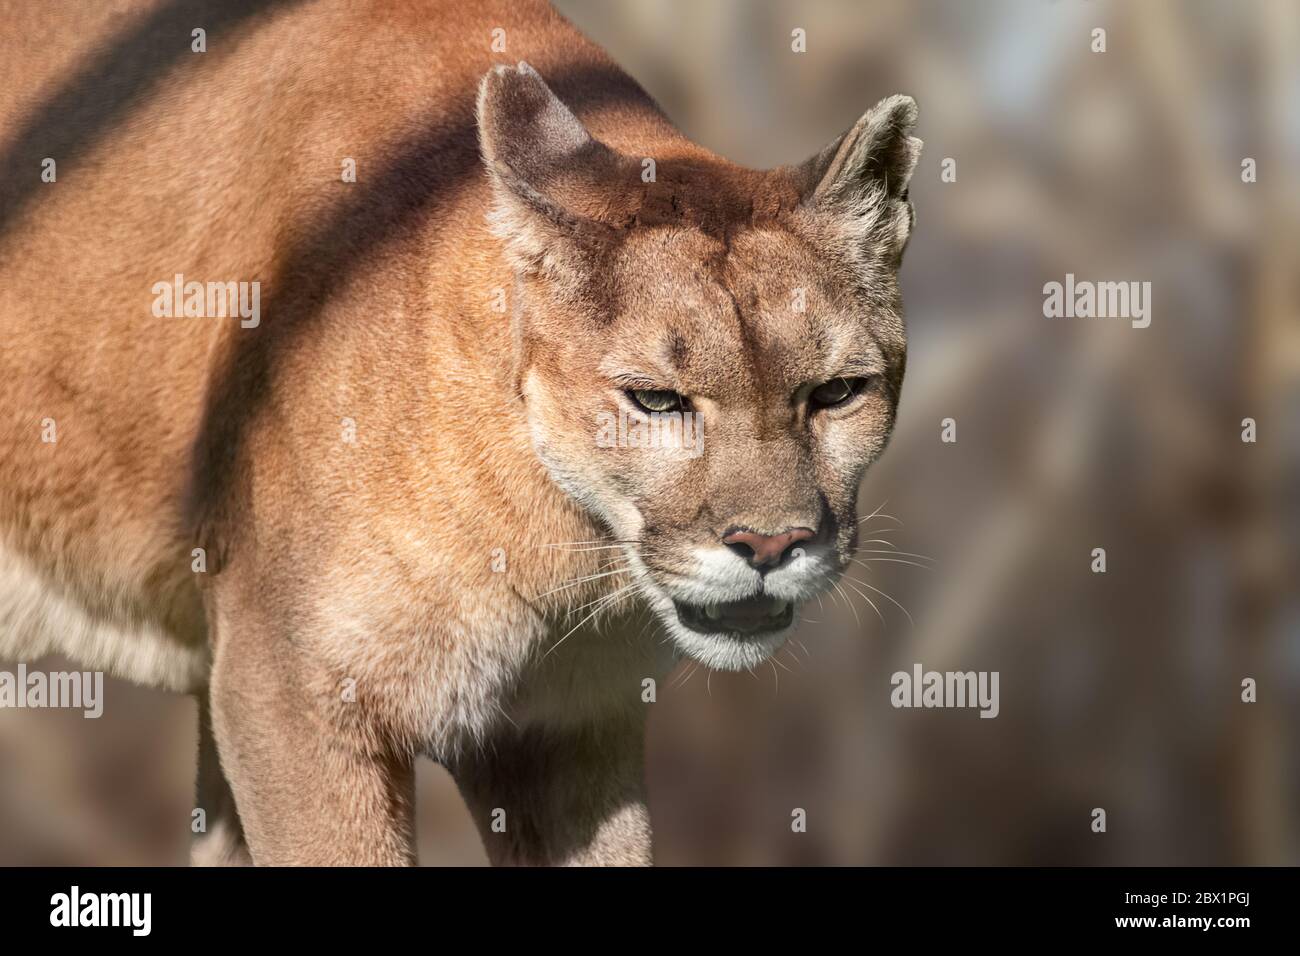 Cougar big strong wild cat animal walking in natural brown environment close-up with blurred background Stock Photo